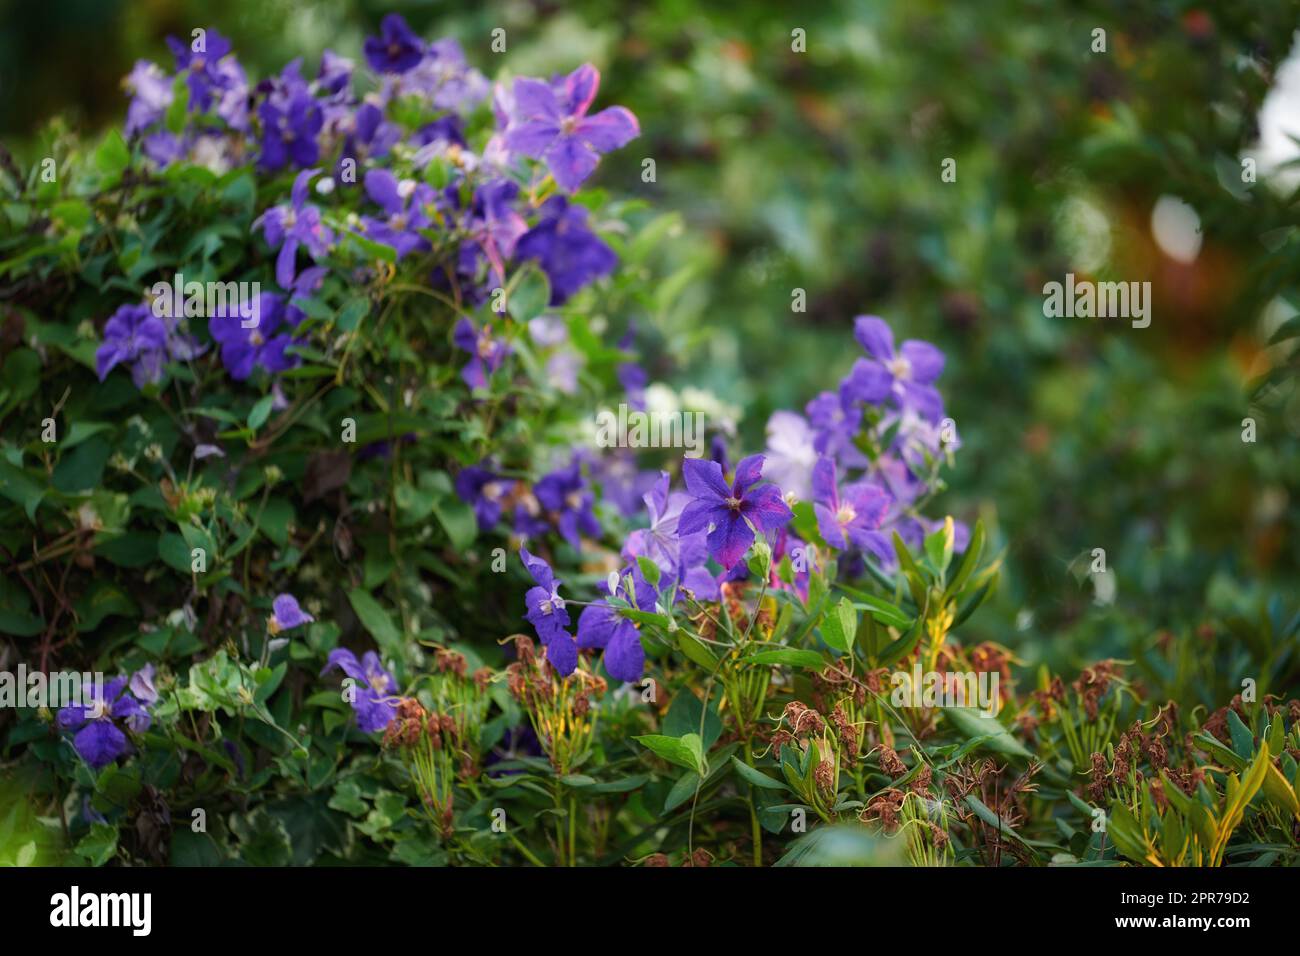 Purple clematis flowers growing in a garden with copy space. Bunch of blossoms in a lush green outdoor park. Lots of beautiful ornamental Italian leather flower plants for backyard landscaping Stock Photo